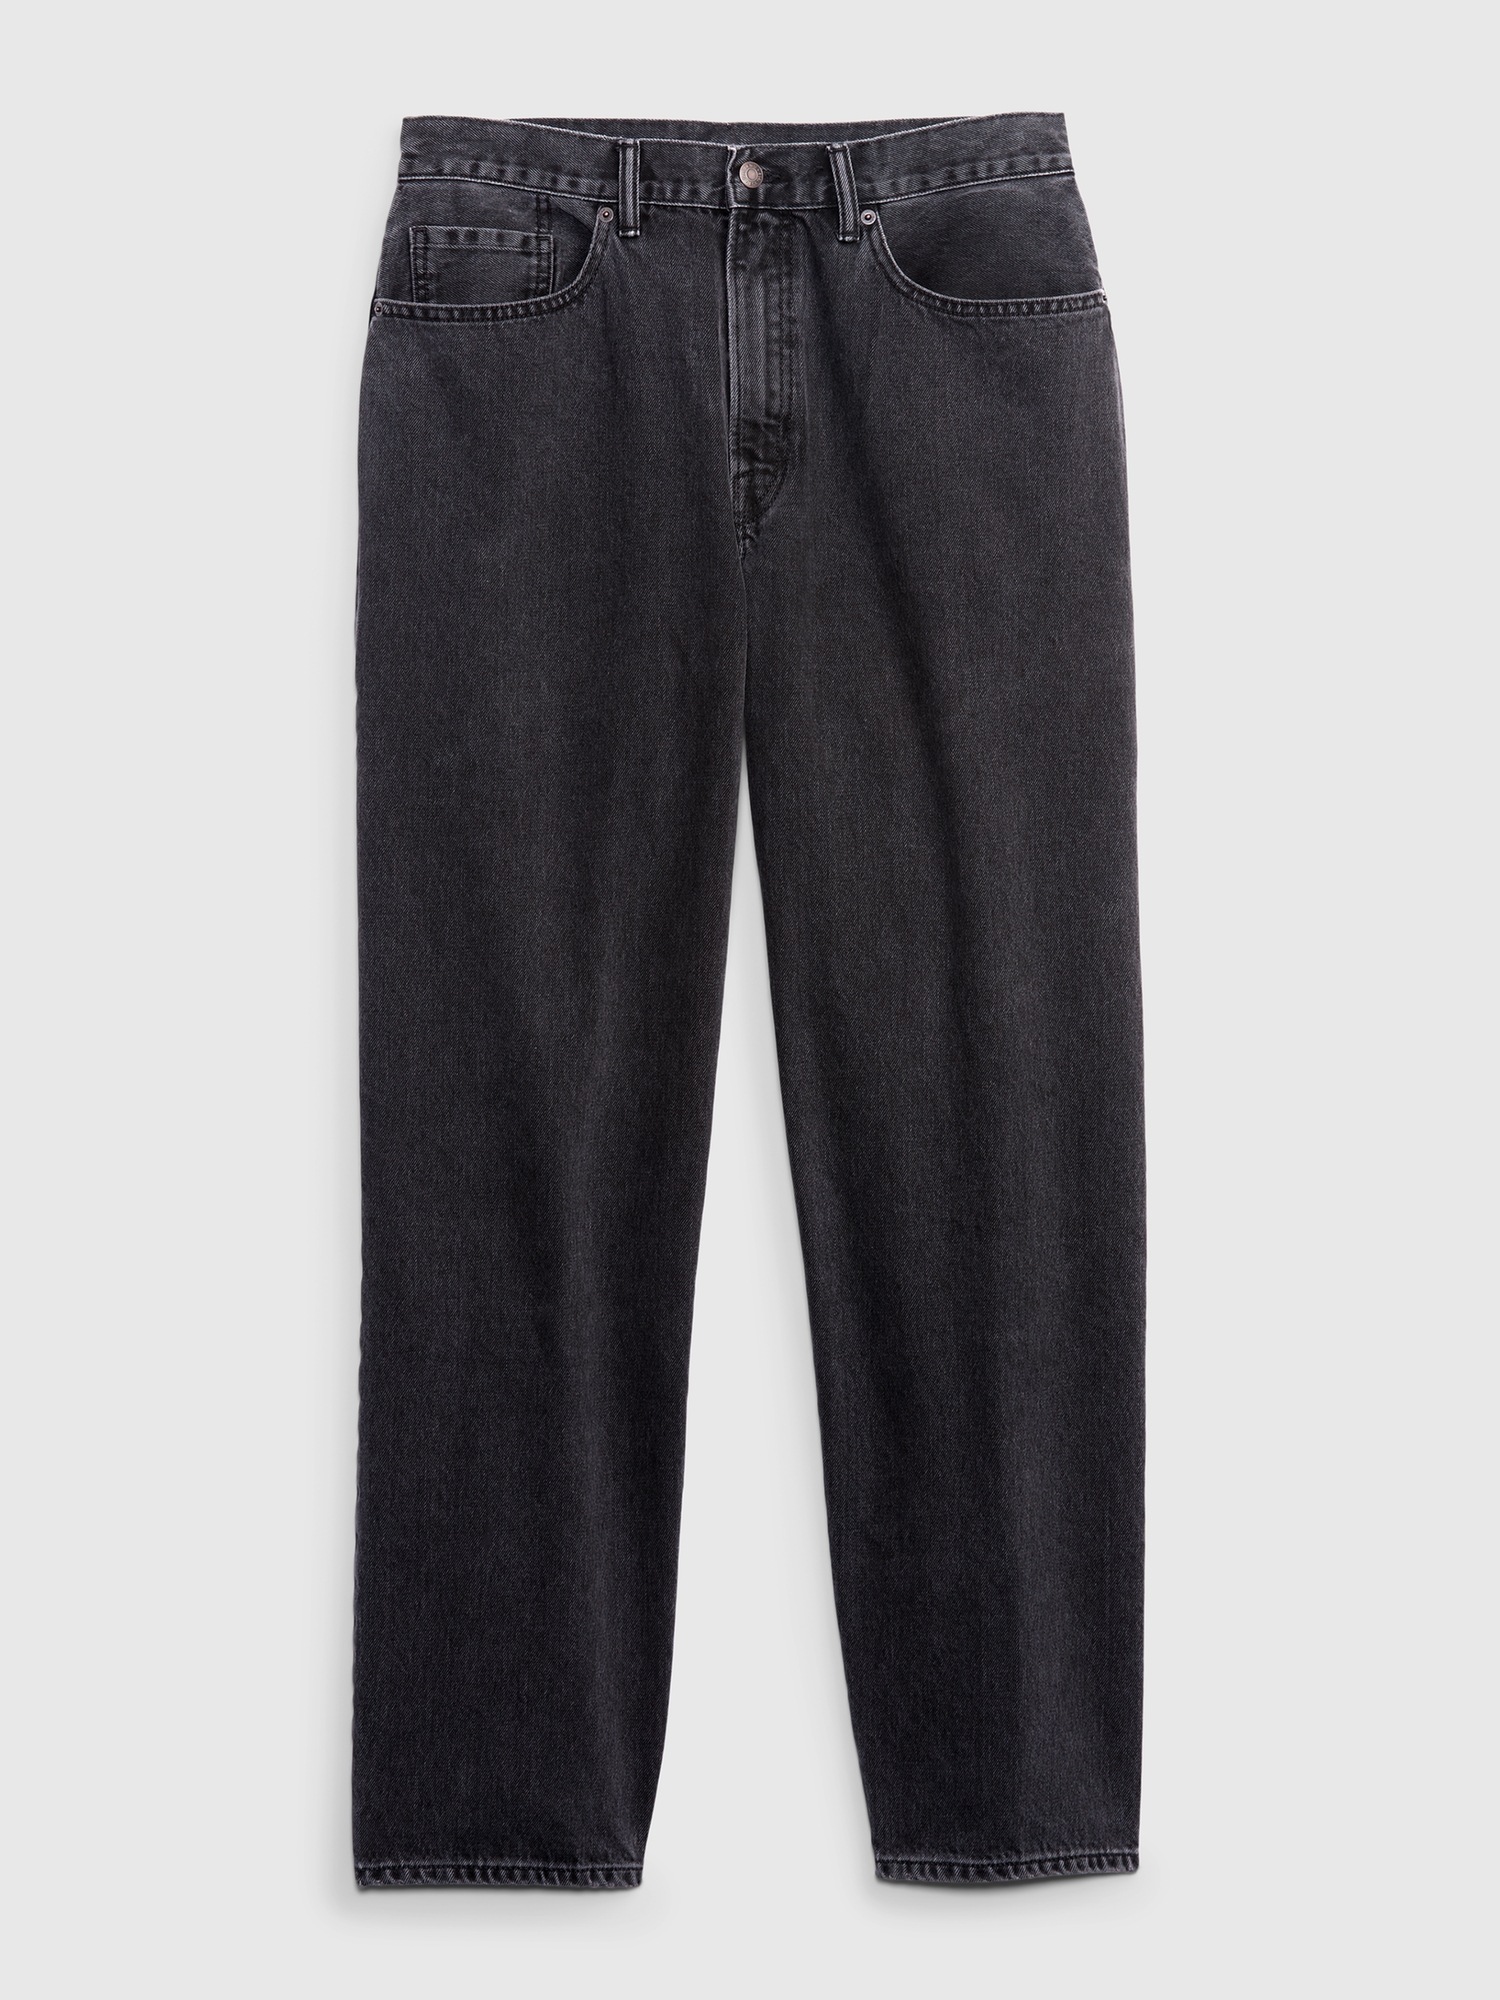 GAP Jeans - Select from Latest Collection of GAP Jeans